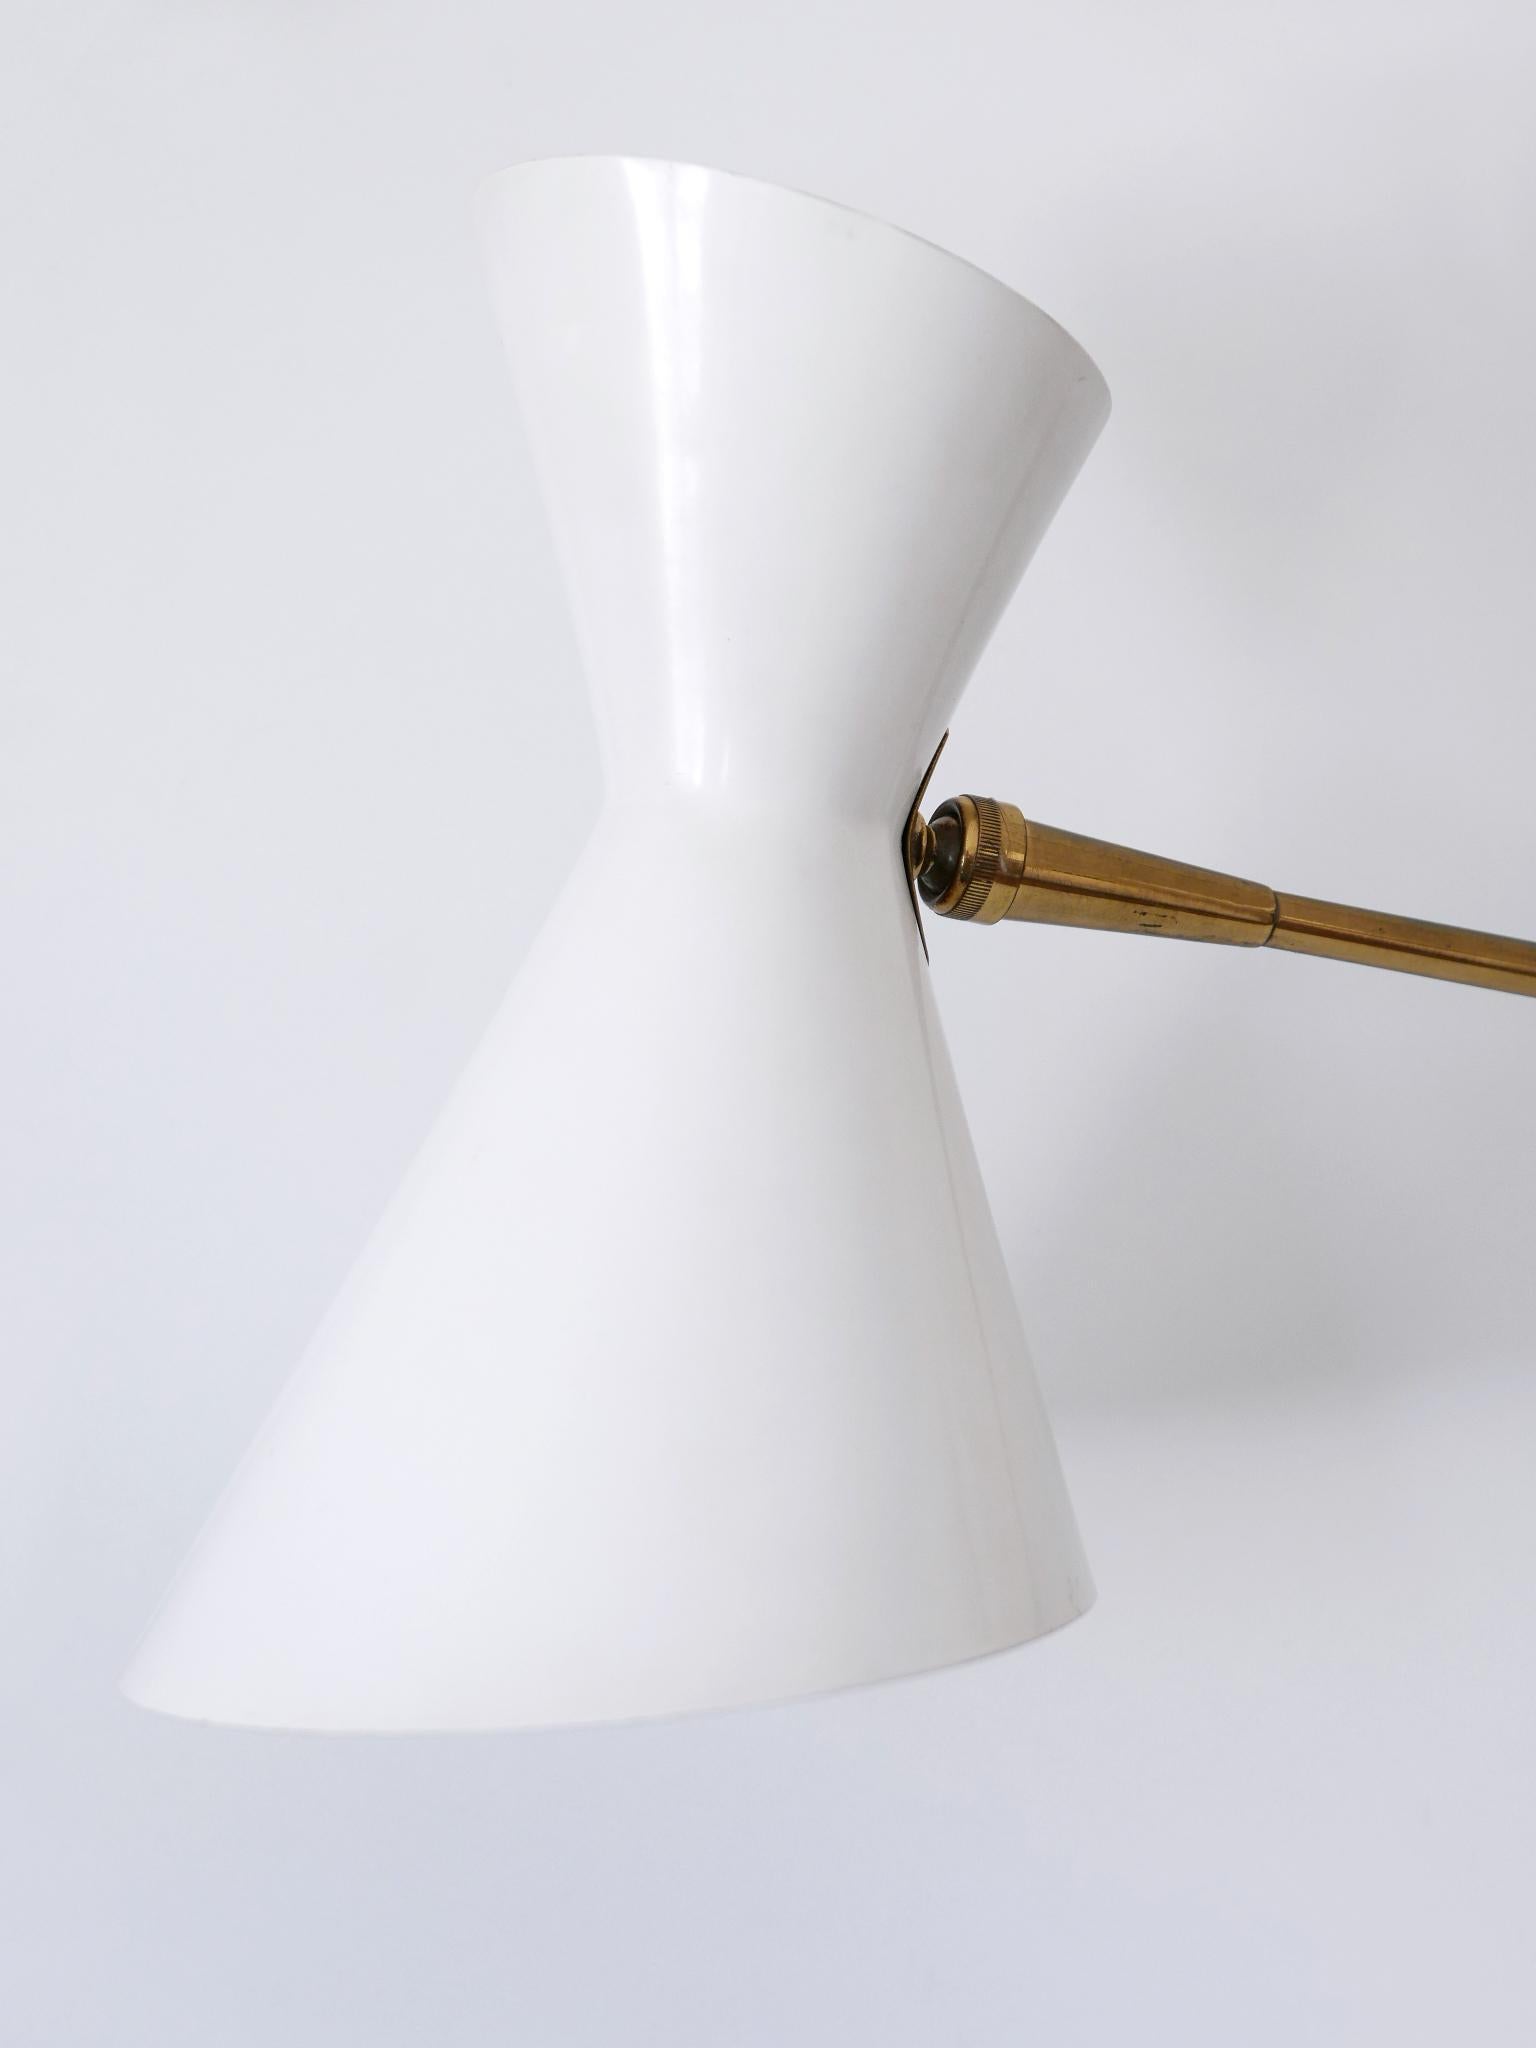 Elegant Mid Century Articulated Diabolo Wall Lamp by Belmag Switzerland 1950s For Sale 2